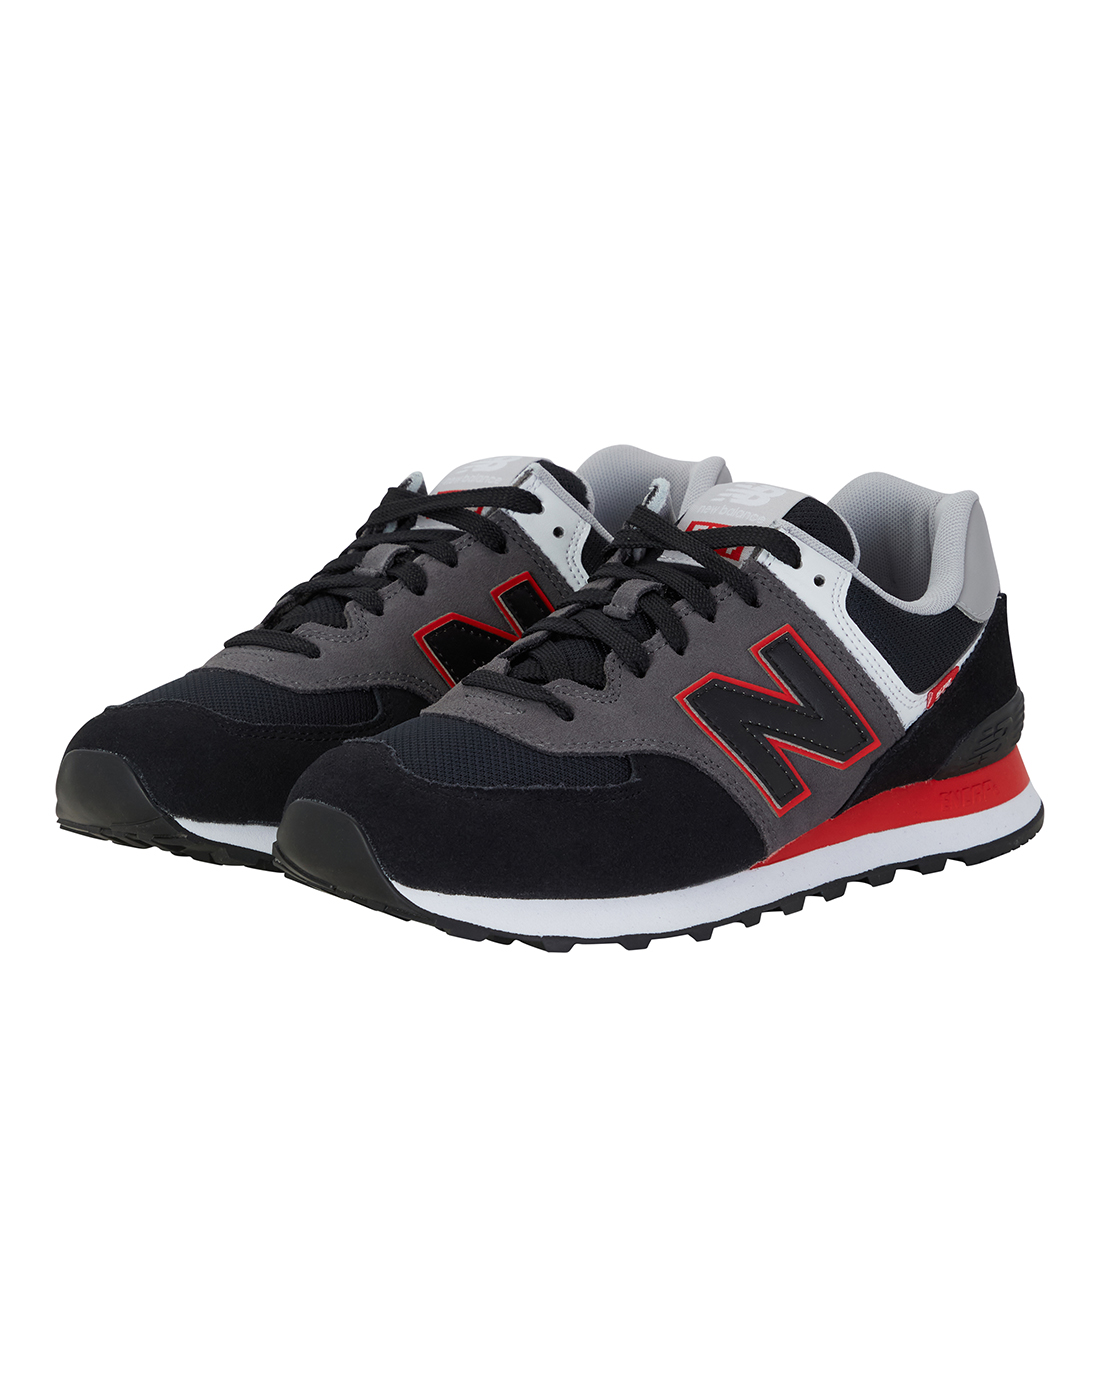 New Balance Mens 574 Trainers - Grey | Life Style Sports IE